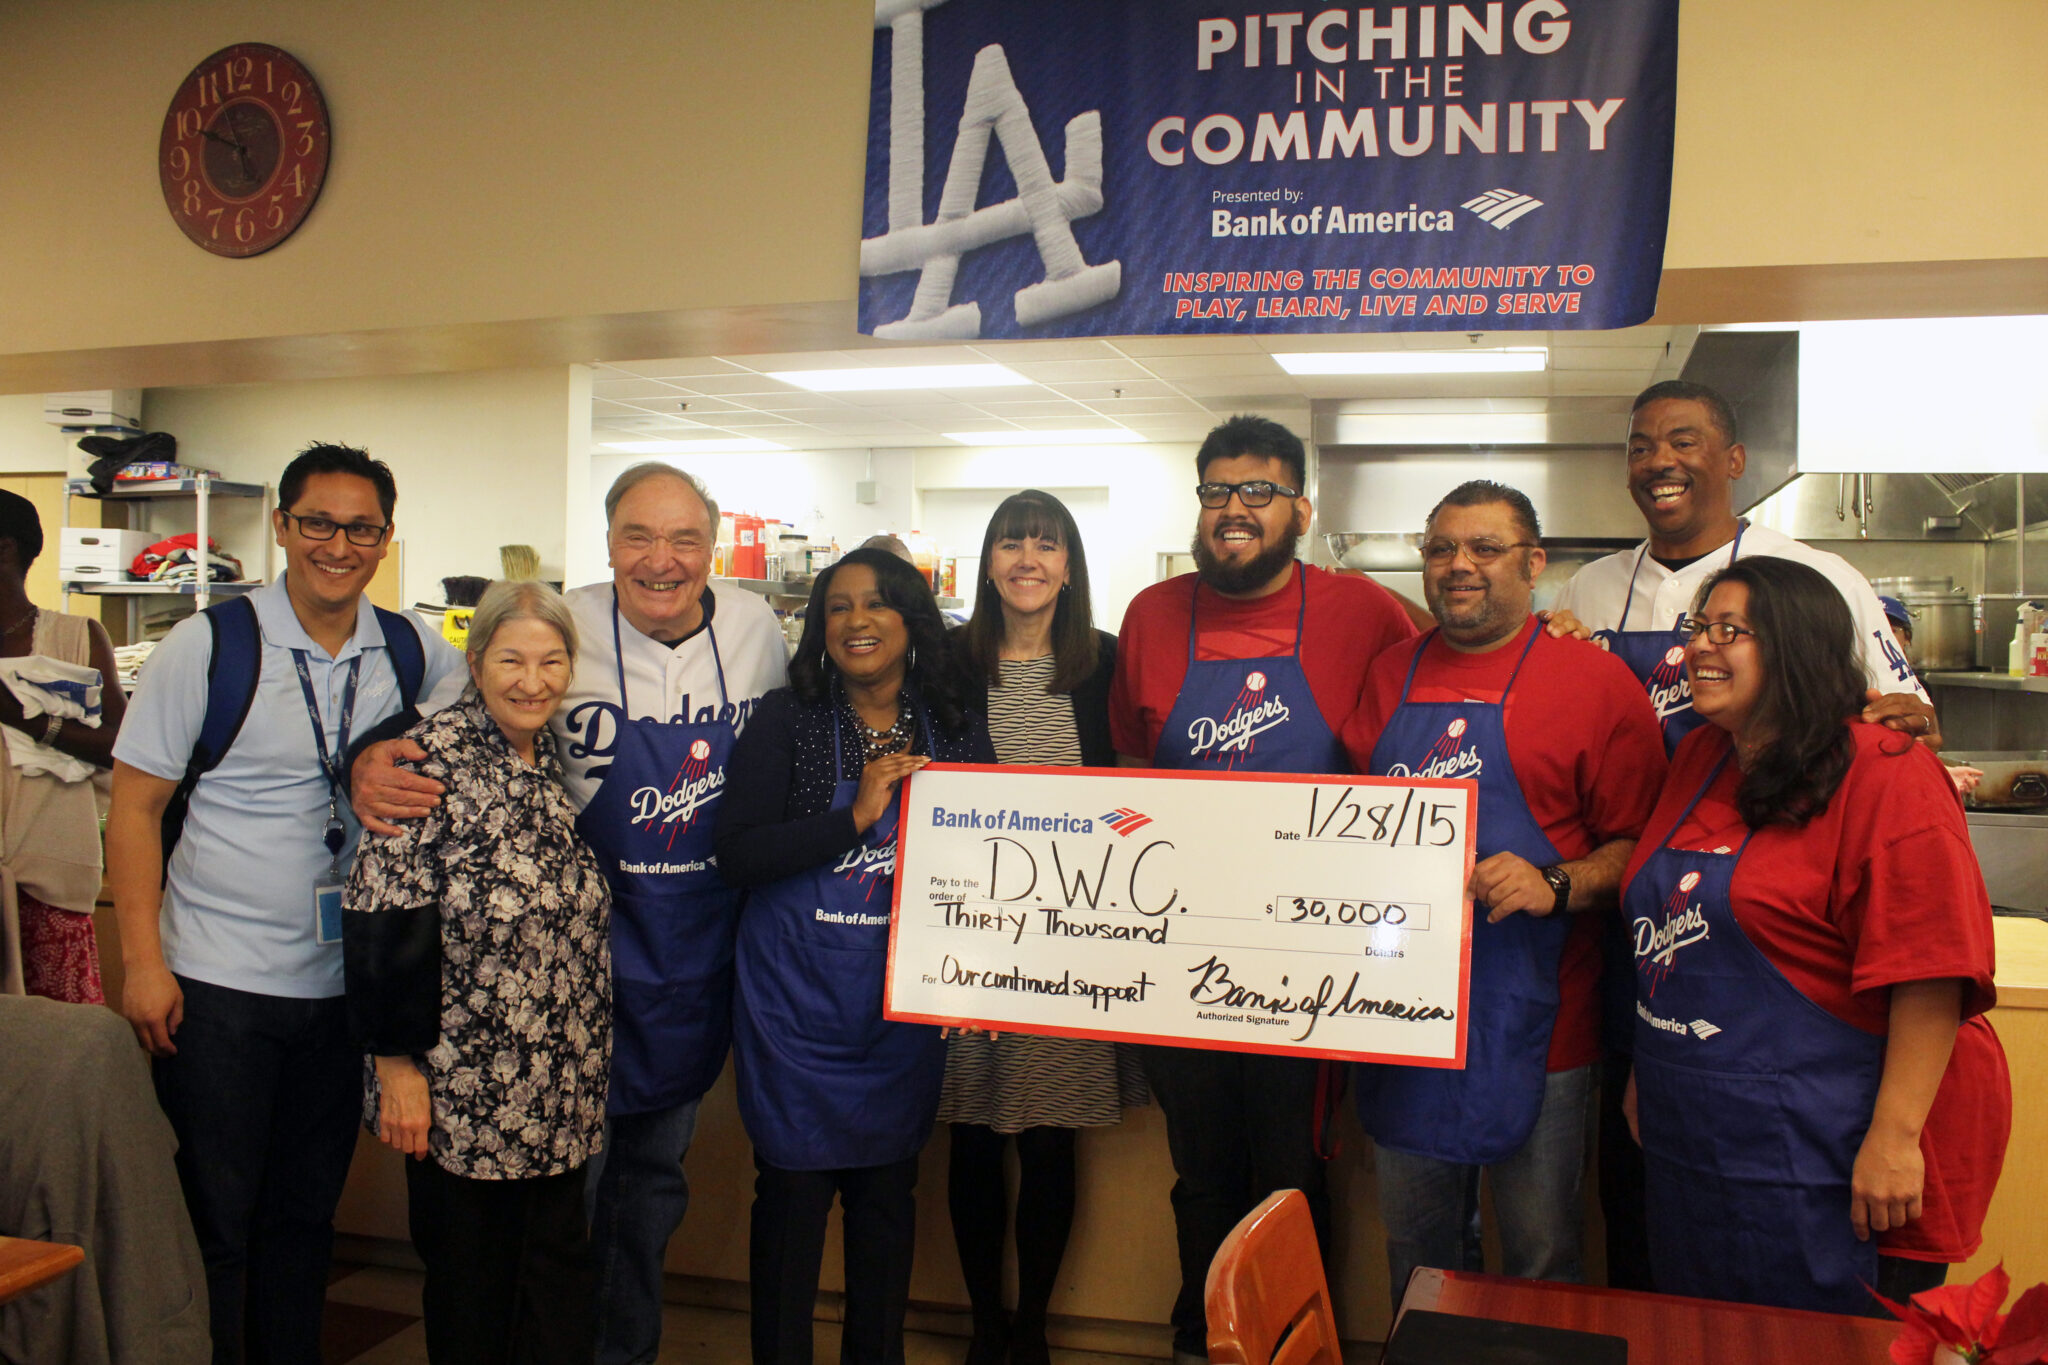 DWC CEO Sylvia Rosenberger accepts $30,000 grant from Bank of America in early 2015.